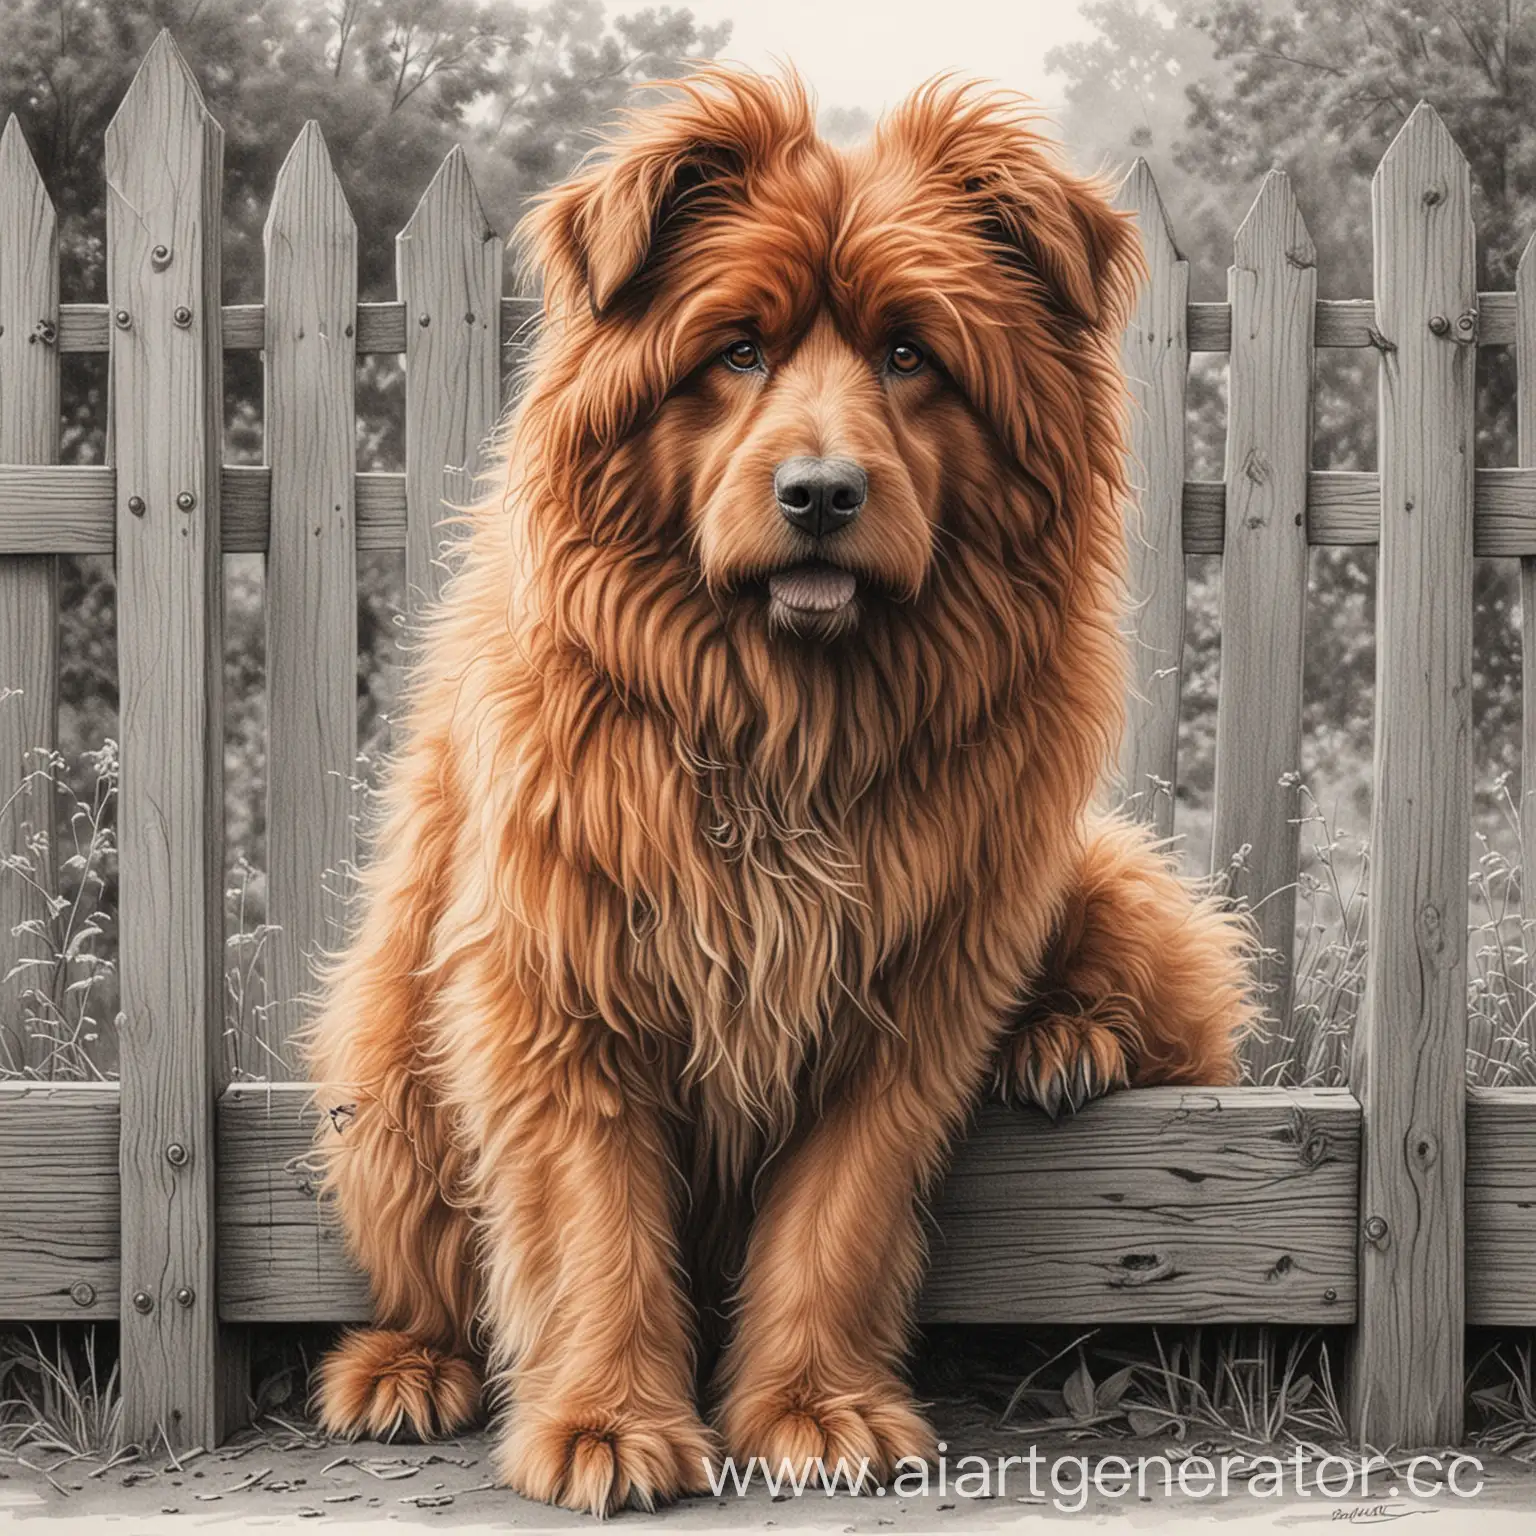 Big-Red-Shaggy-Dog-Sitting-by-the-Fence-Pencil-Drawing